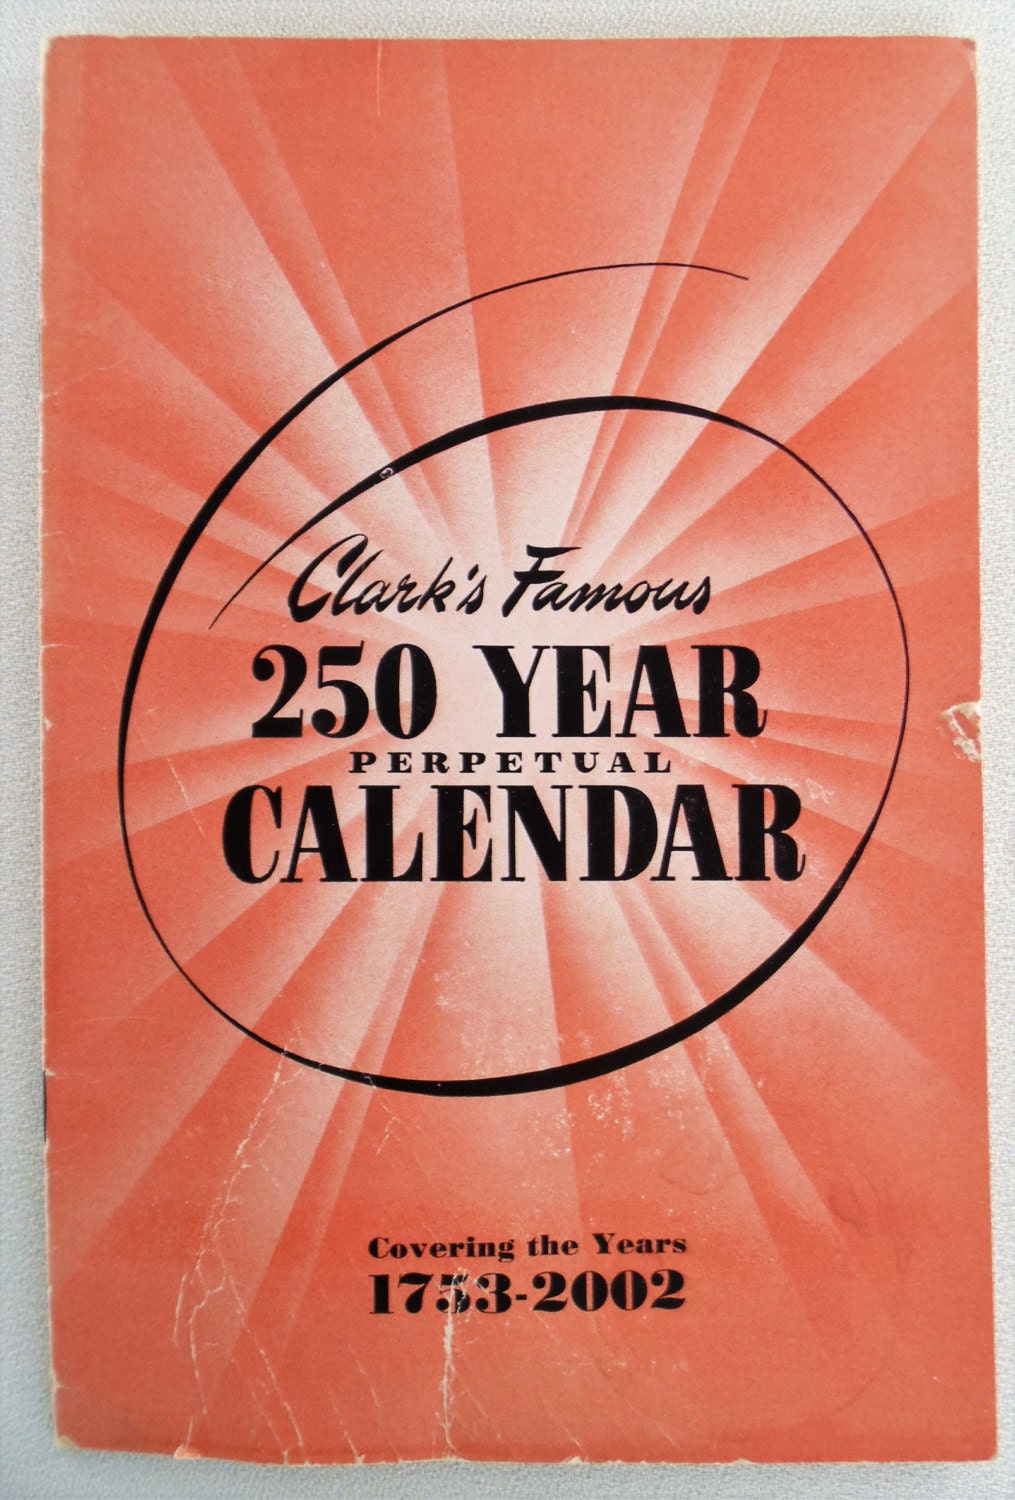 Clarks Famous 250 Year Perpetual Calendar Booklet Covering The